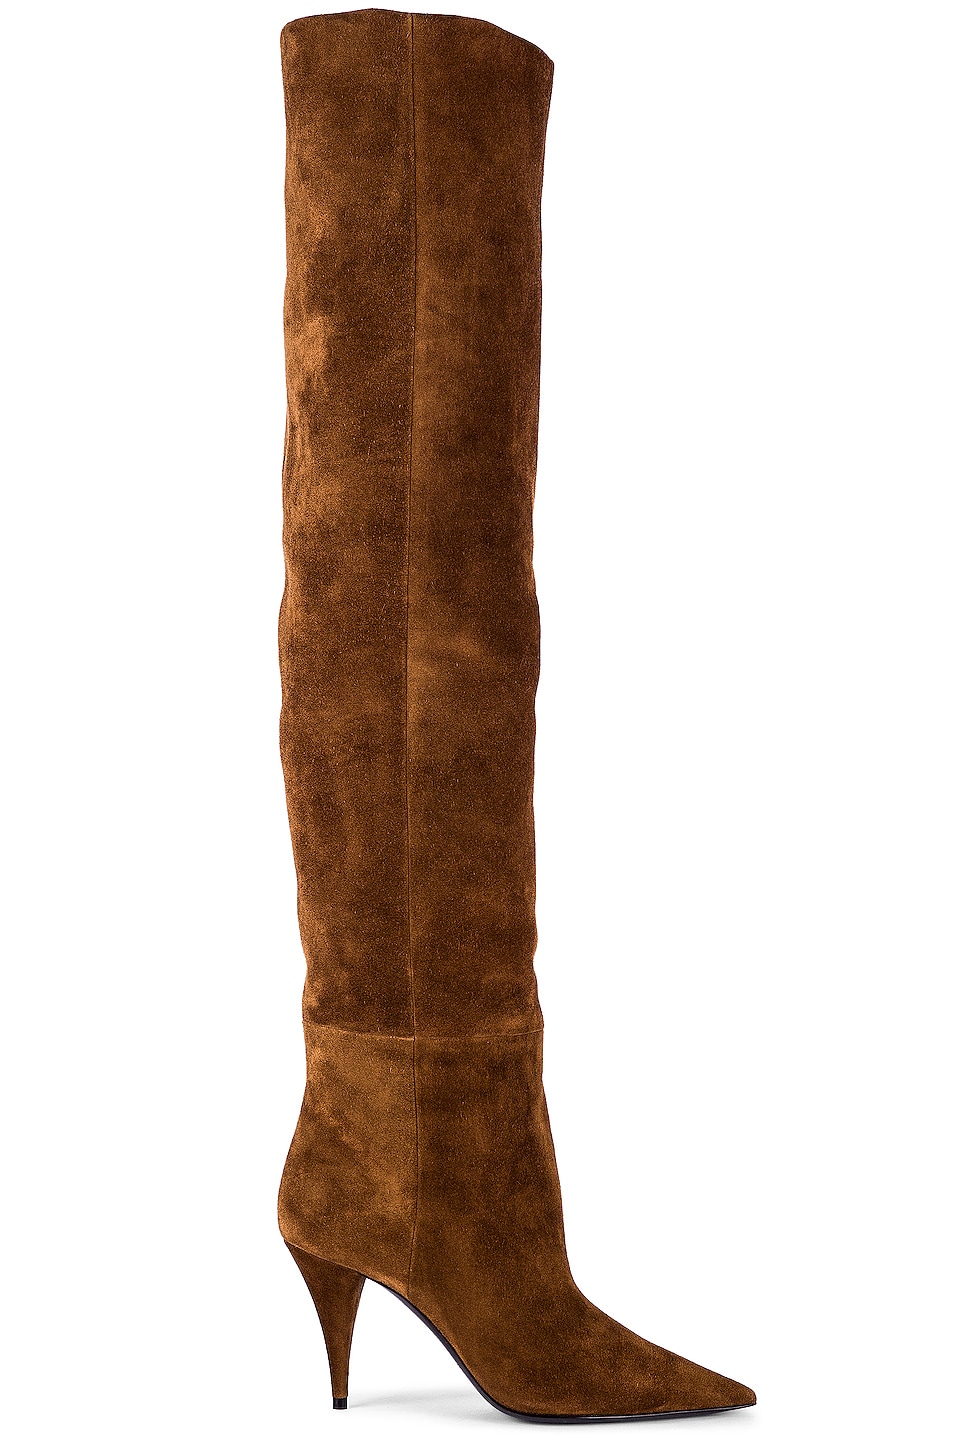 Image 1 of Saint Laurent Kiki Suede Over the Knee Boots in Land